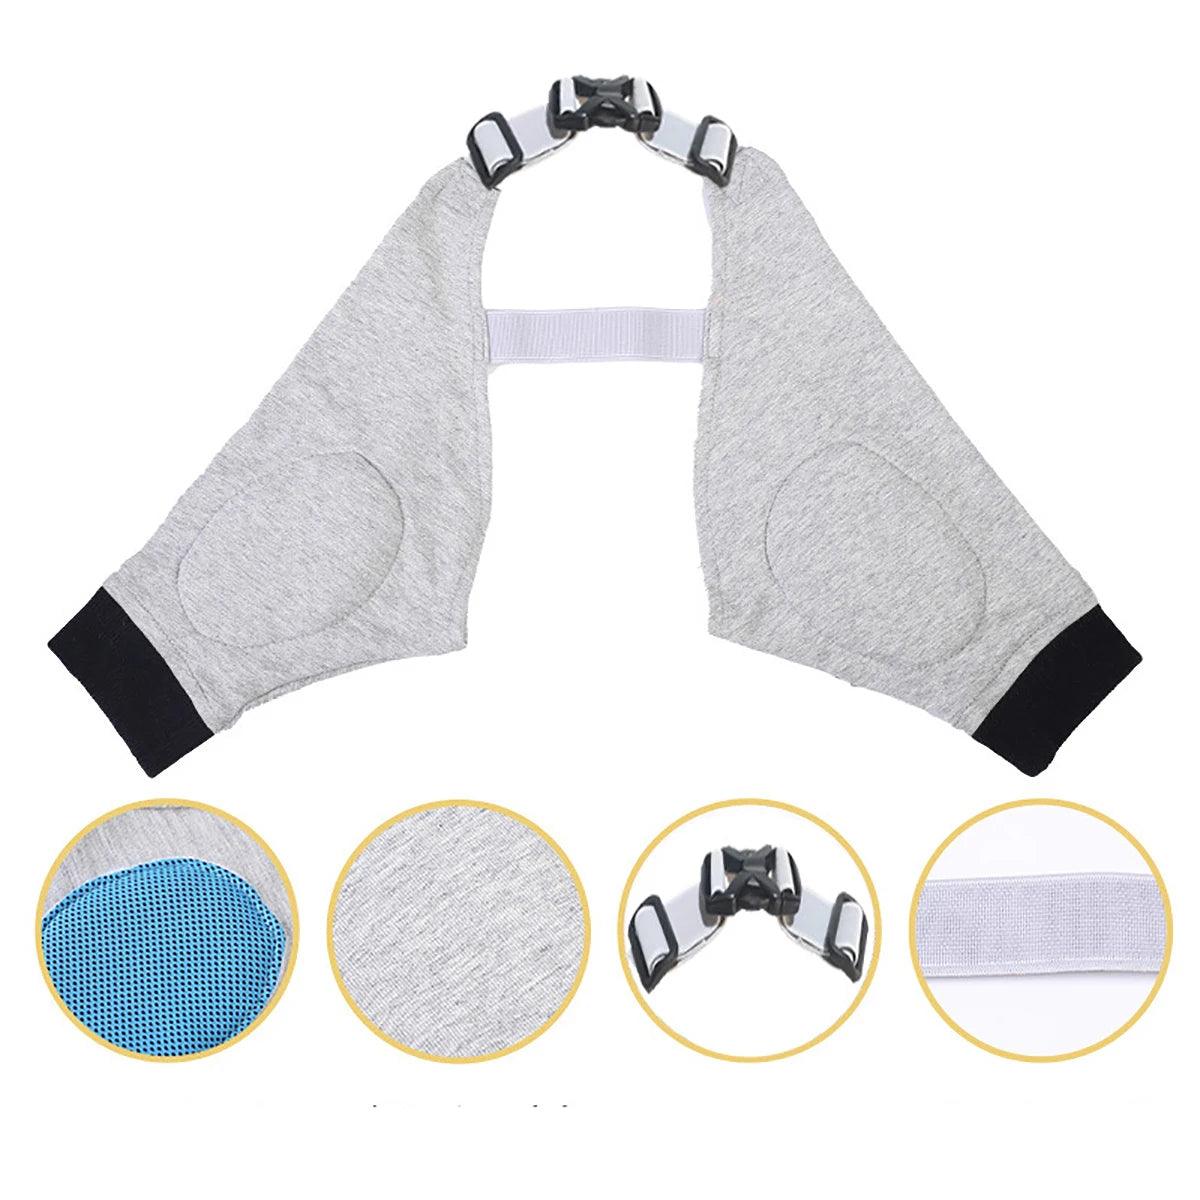 Dog Elbow Brace Protector Anti - Lick Wound Soft Breathable Pain Relief Shoulder Support Elbow Sleeves Pads for Canine Elbow - Ammpoure Wellbeing